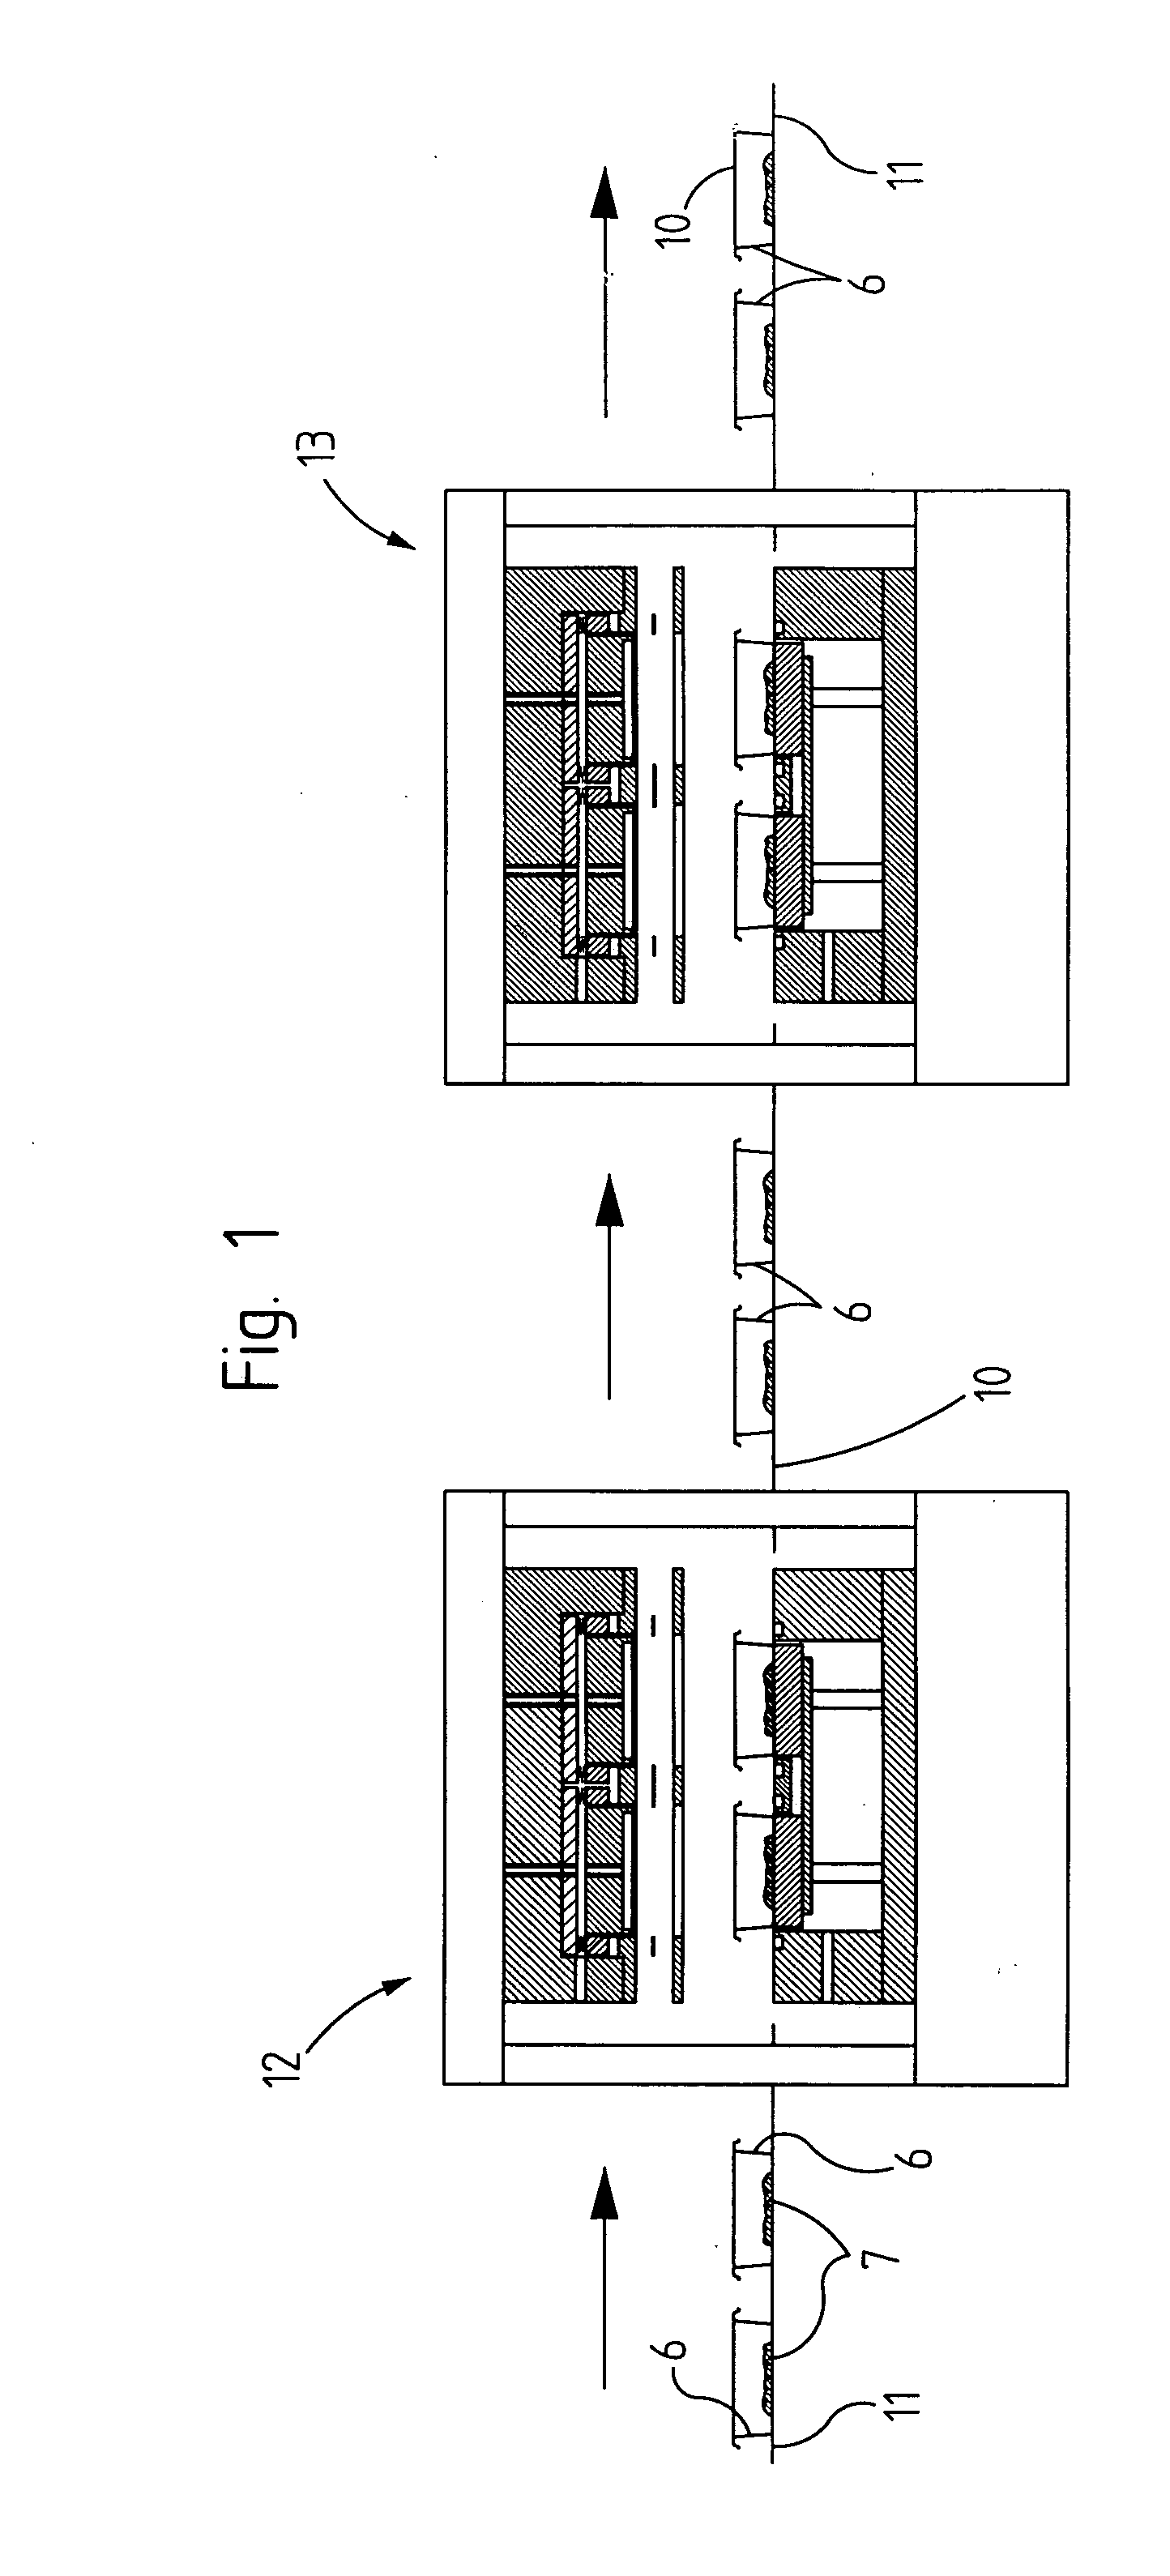 Method and system for the gas-tight packing of objects